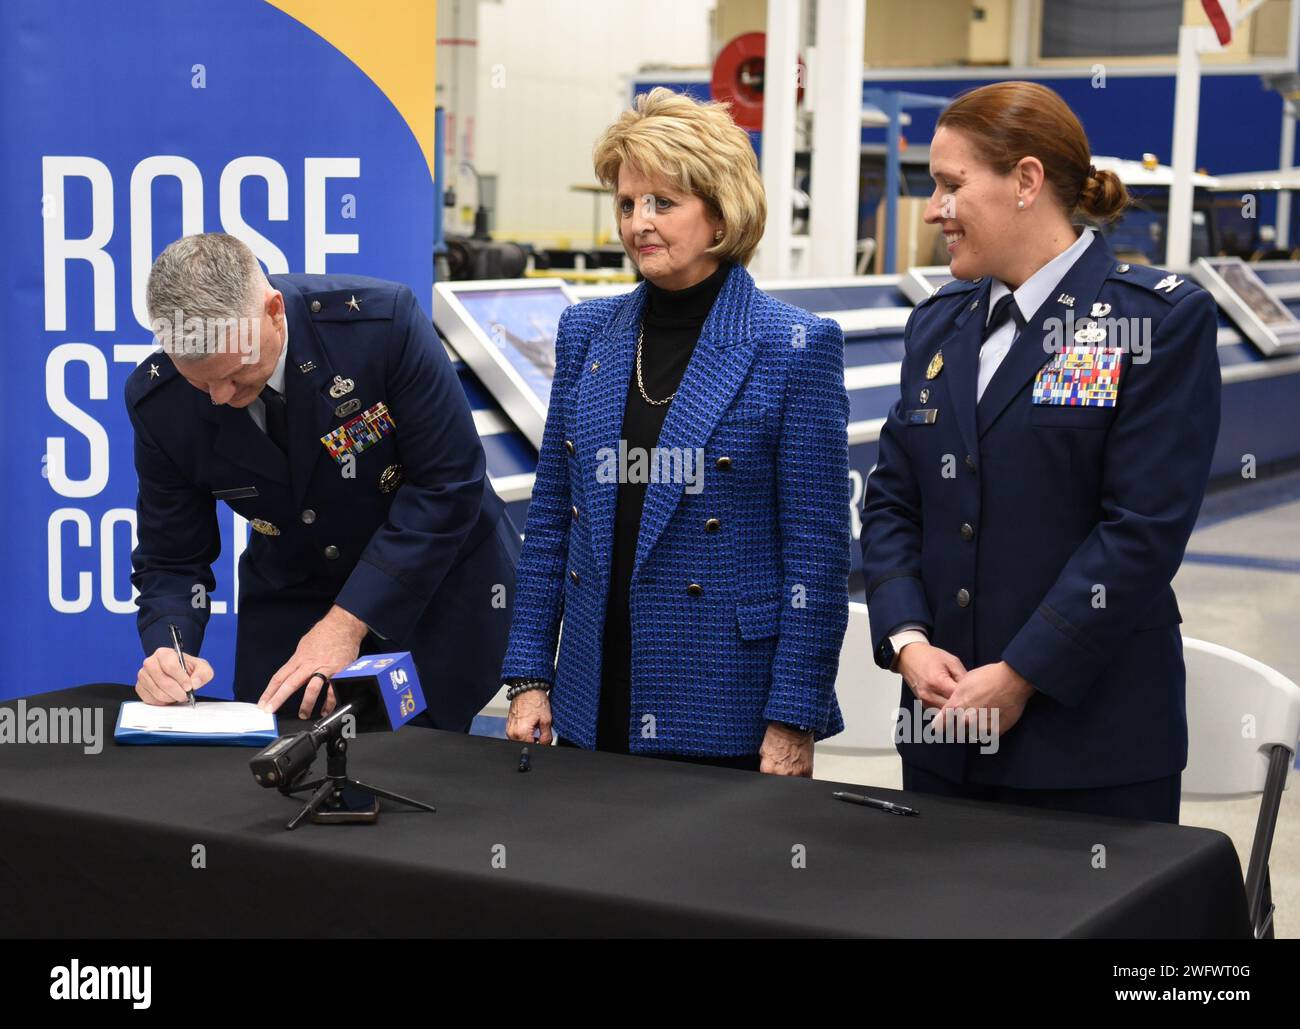 TINKER AIR FORCE BASE, Okla. — Brig. Gen. Brian Moore, left, commander of the Oklahoma City Air Logistics Complex, signs an education partnership agreement among Rose State College, the OC-ALC and the 72nd Air Base Wing during a ceremony held on Tinker Air Force Base, Oklahoma, Jan. 17. The partnership provides Rose State with access to industry resources and experts while providing a pipeline for Rose’s STEM students to explore a career at the OC-ALC, which is the largest single-site employer in the state of Oklahoma. Stock Photo